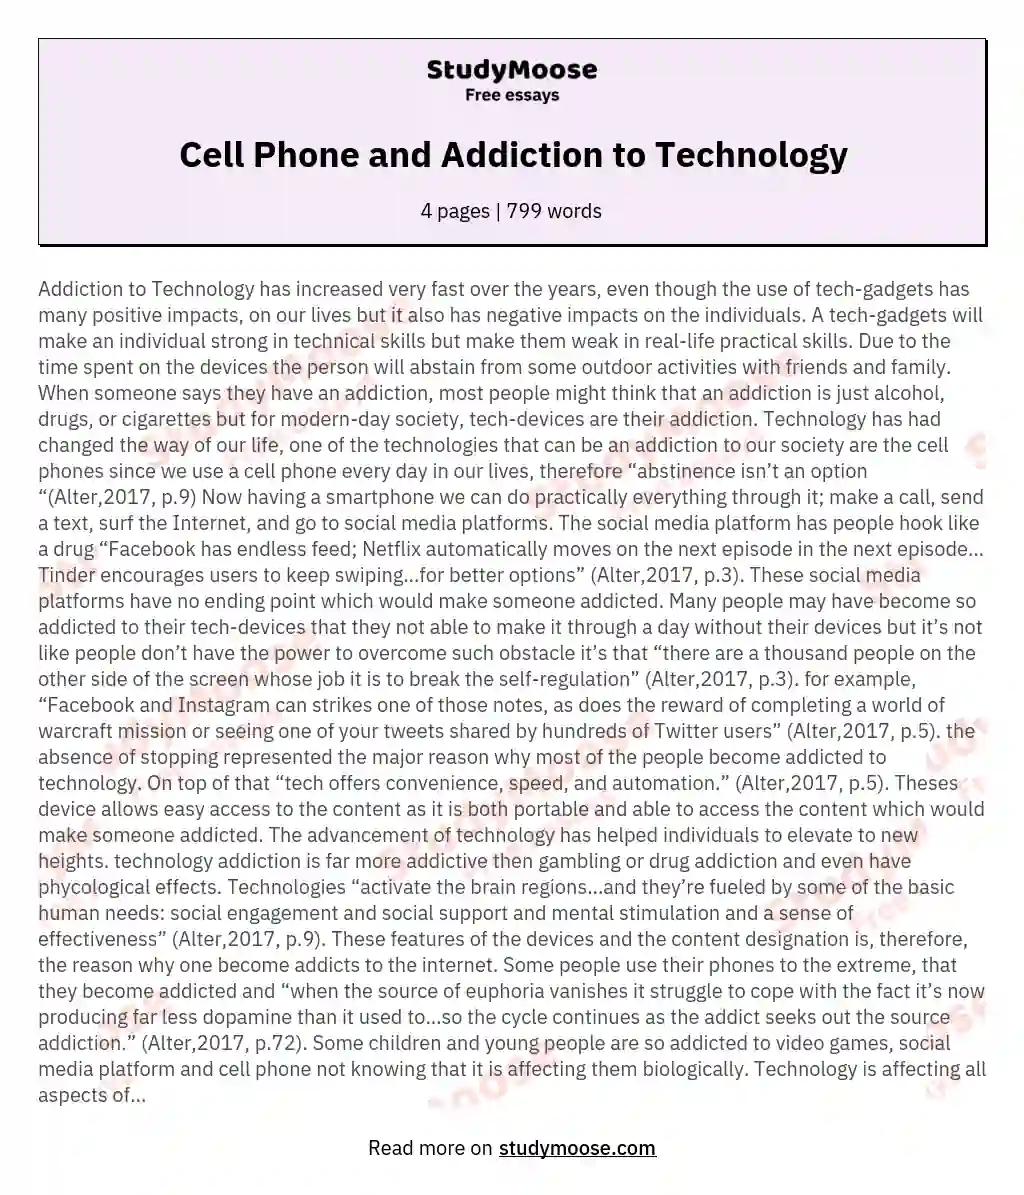 Cell Phone and Addiction to Technology